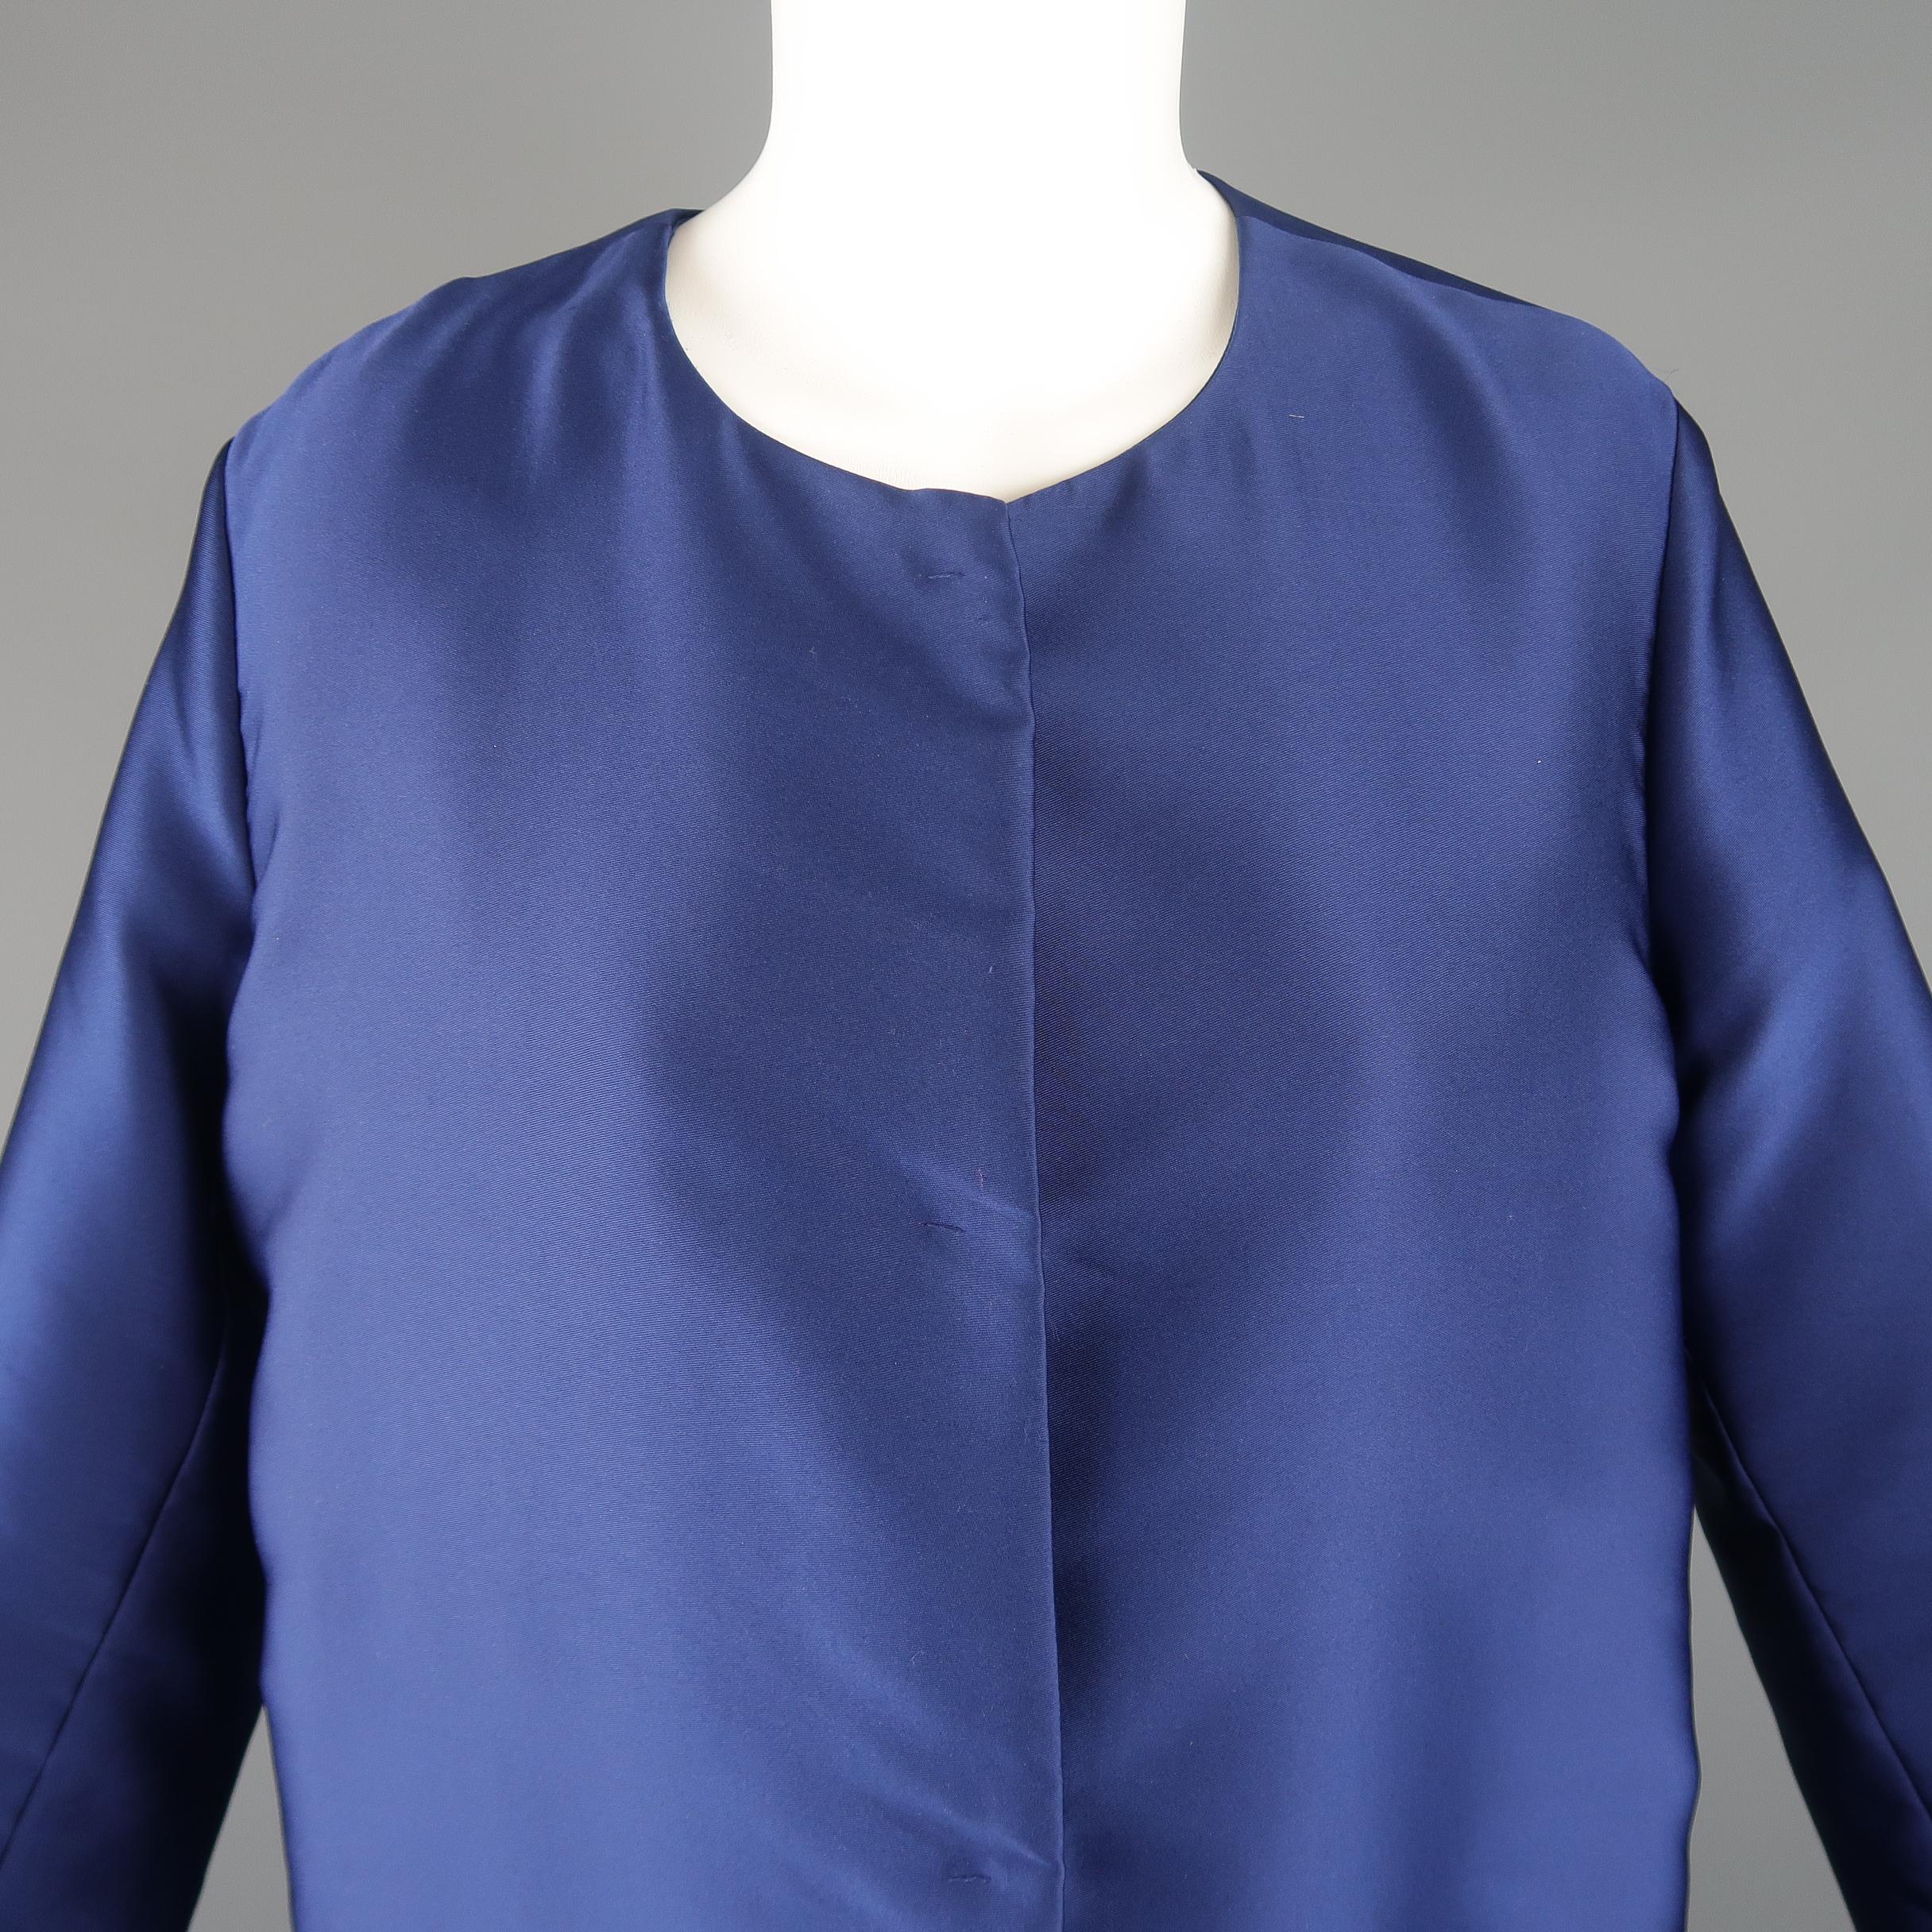 CAROLINA HERRERA evening coat comes in navy blue satin with a round neck, cropped sleeves, slit pockets, and hidden snap front closures. Minor wear. Made in Portugal.
 
Good Pre-Owned Condition.
Marked: 14
 
Measurements:
 
Shoulder: 15 in.
Bust: 50